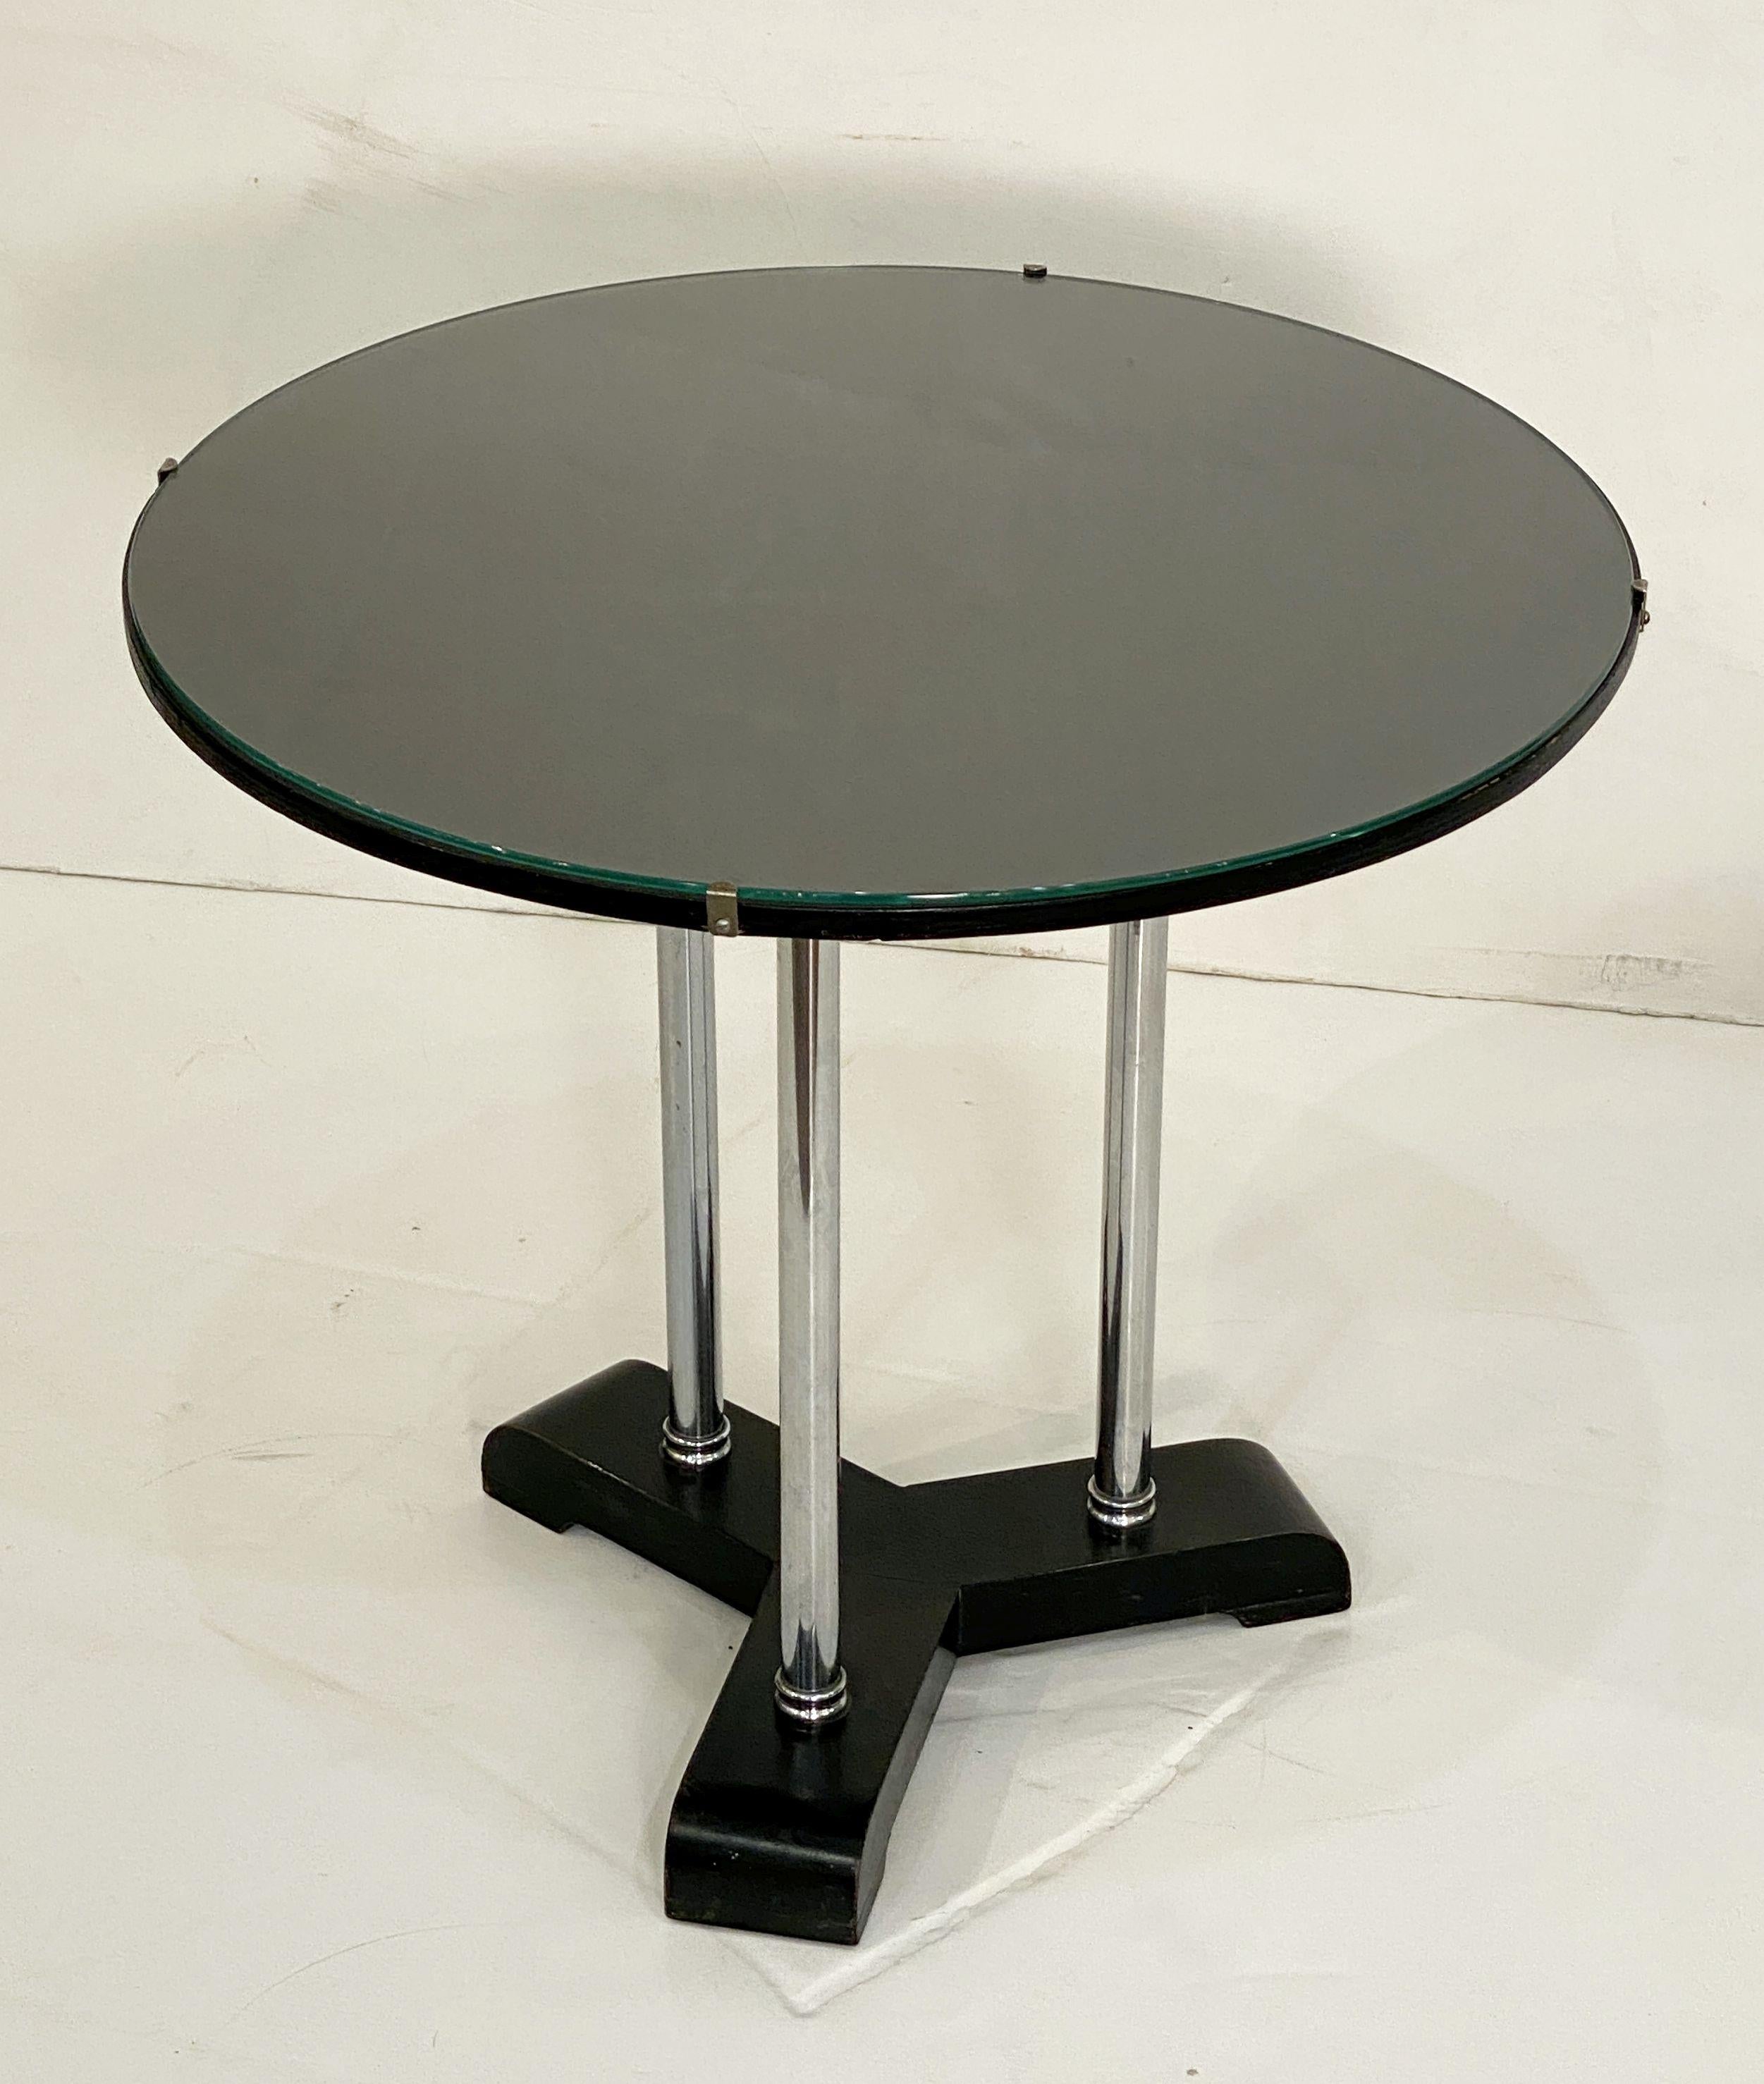 English Art Deco Round Drinks Tripod Table of Chrome, Ebonized Wood, and Glass For Sale 5